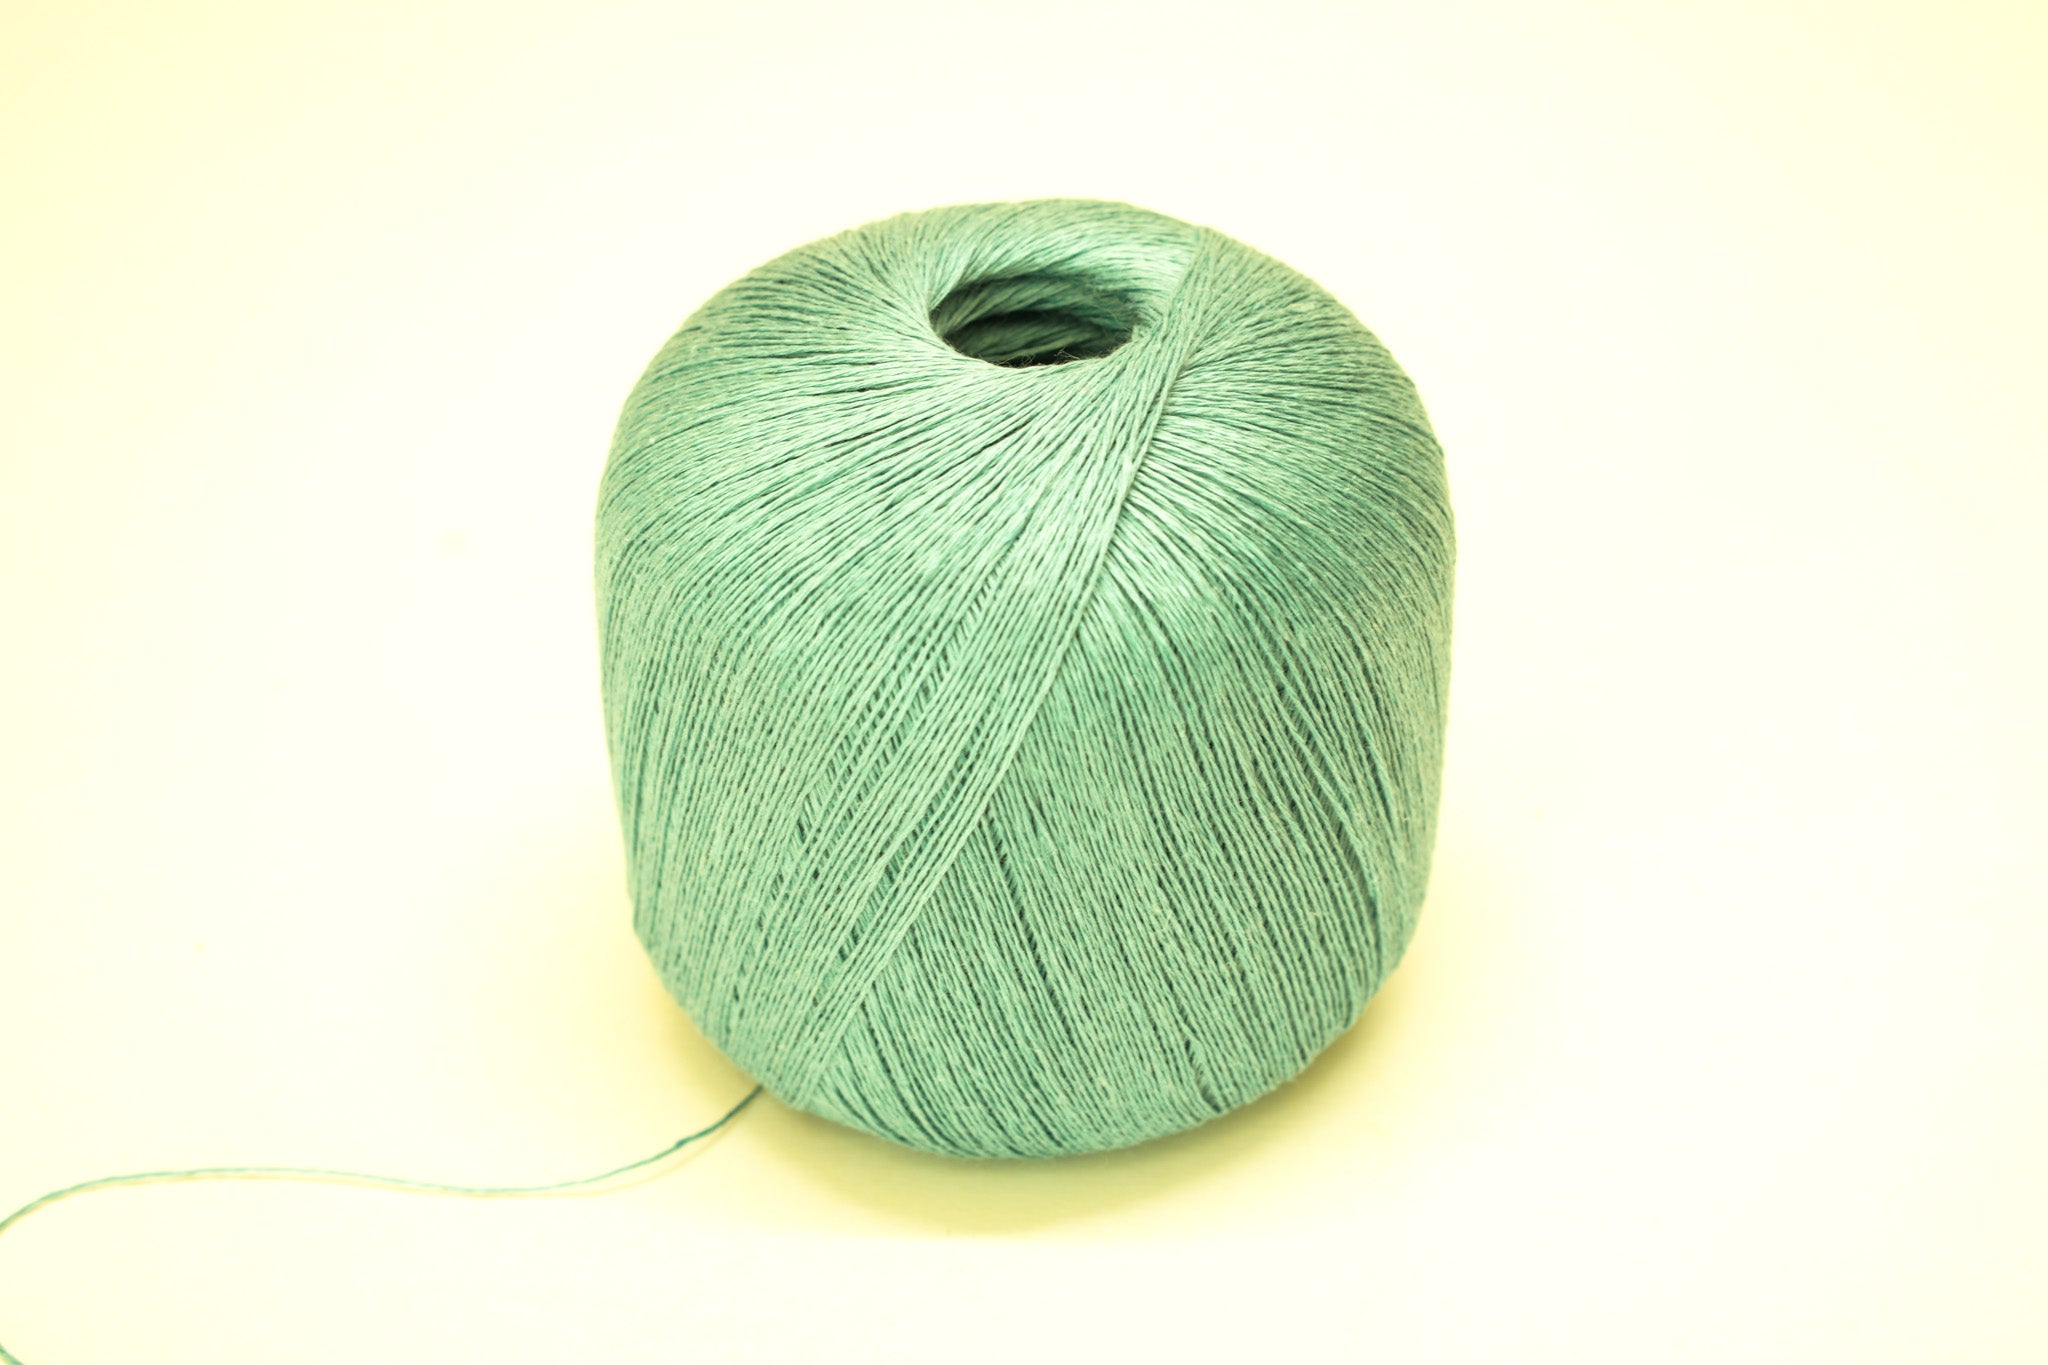 100% linen yarn in Sage green color